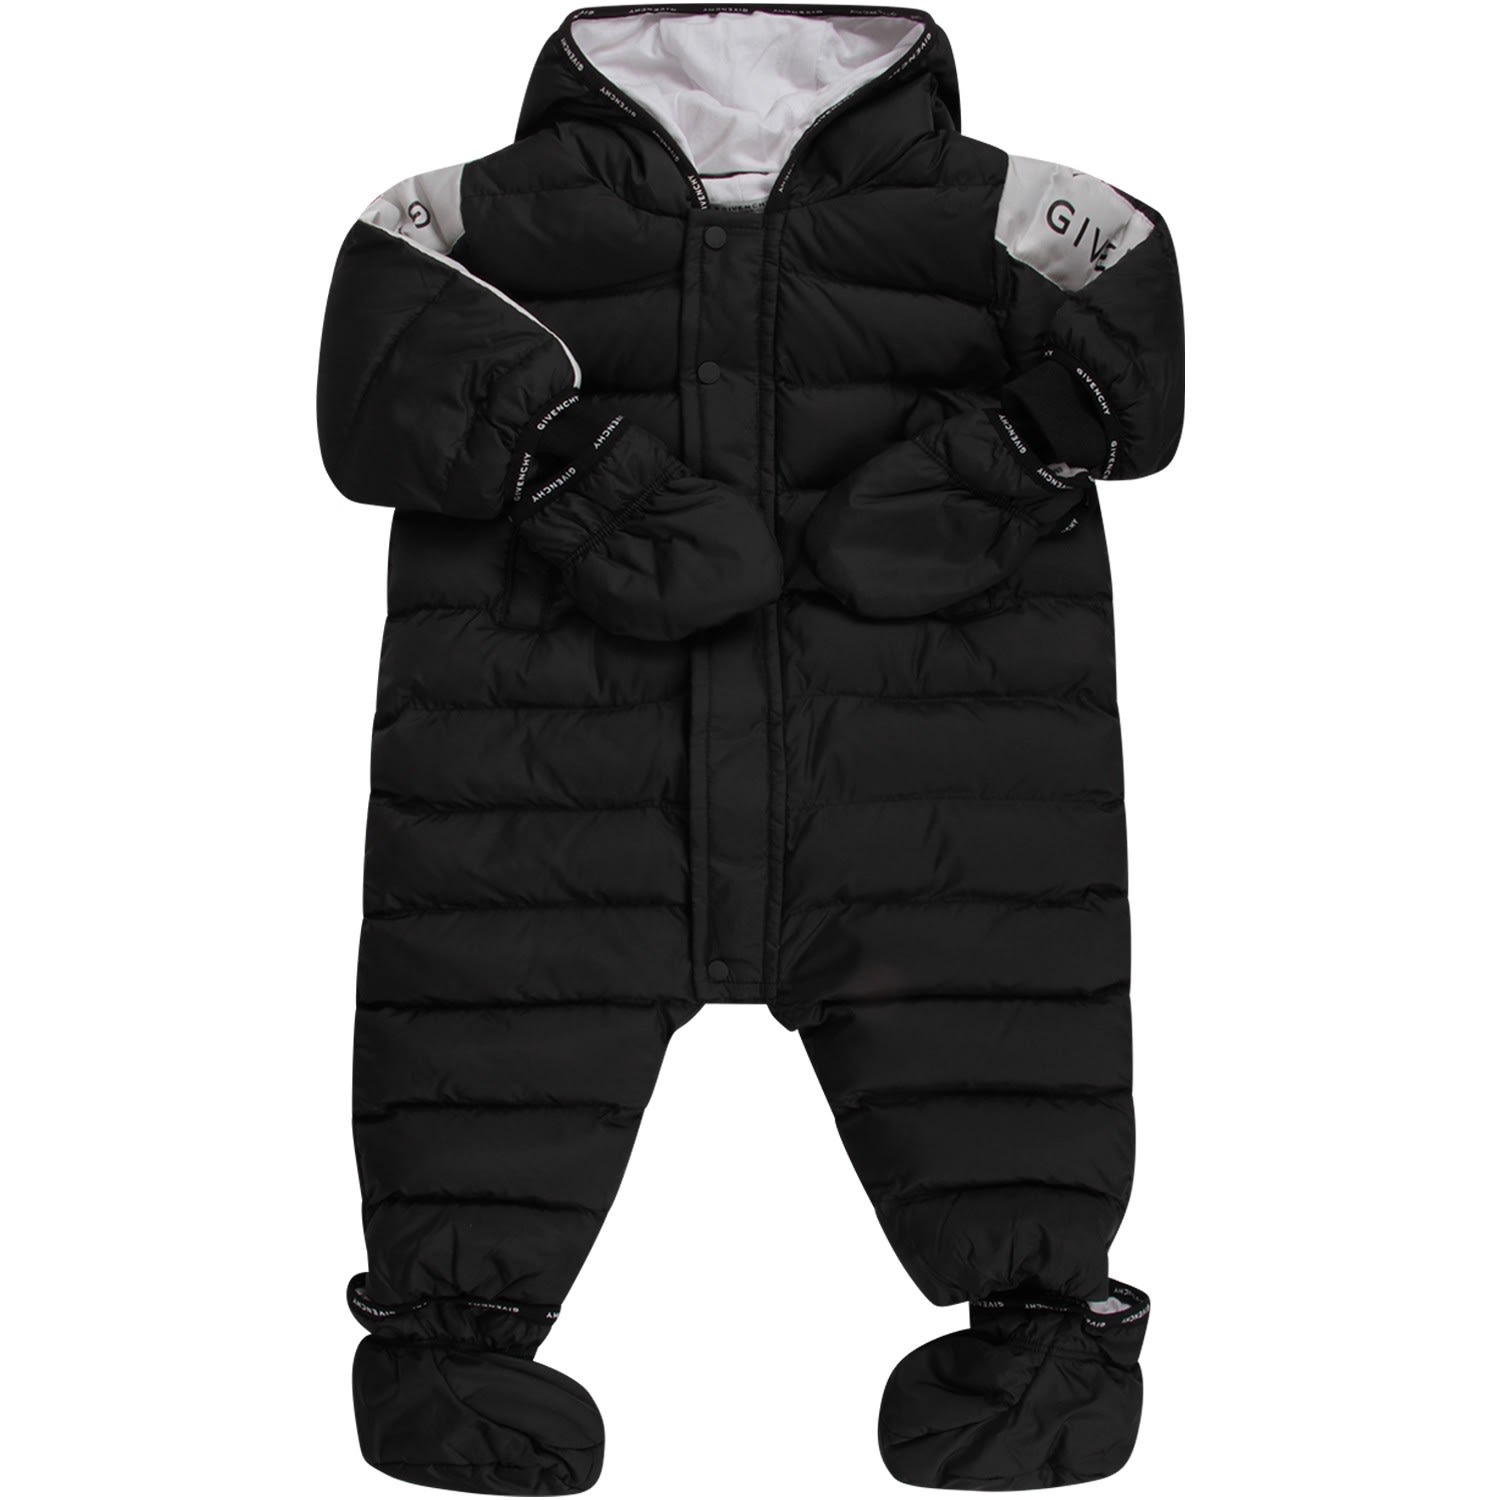 GIVENCHY BLACK BABYKIDS PUFF OVERALL WITH LOGO,11058752